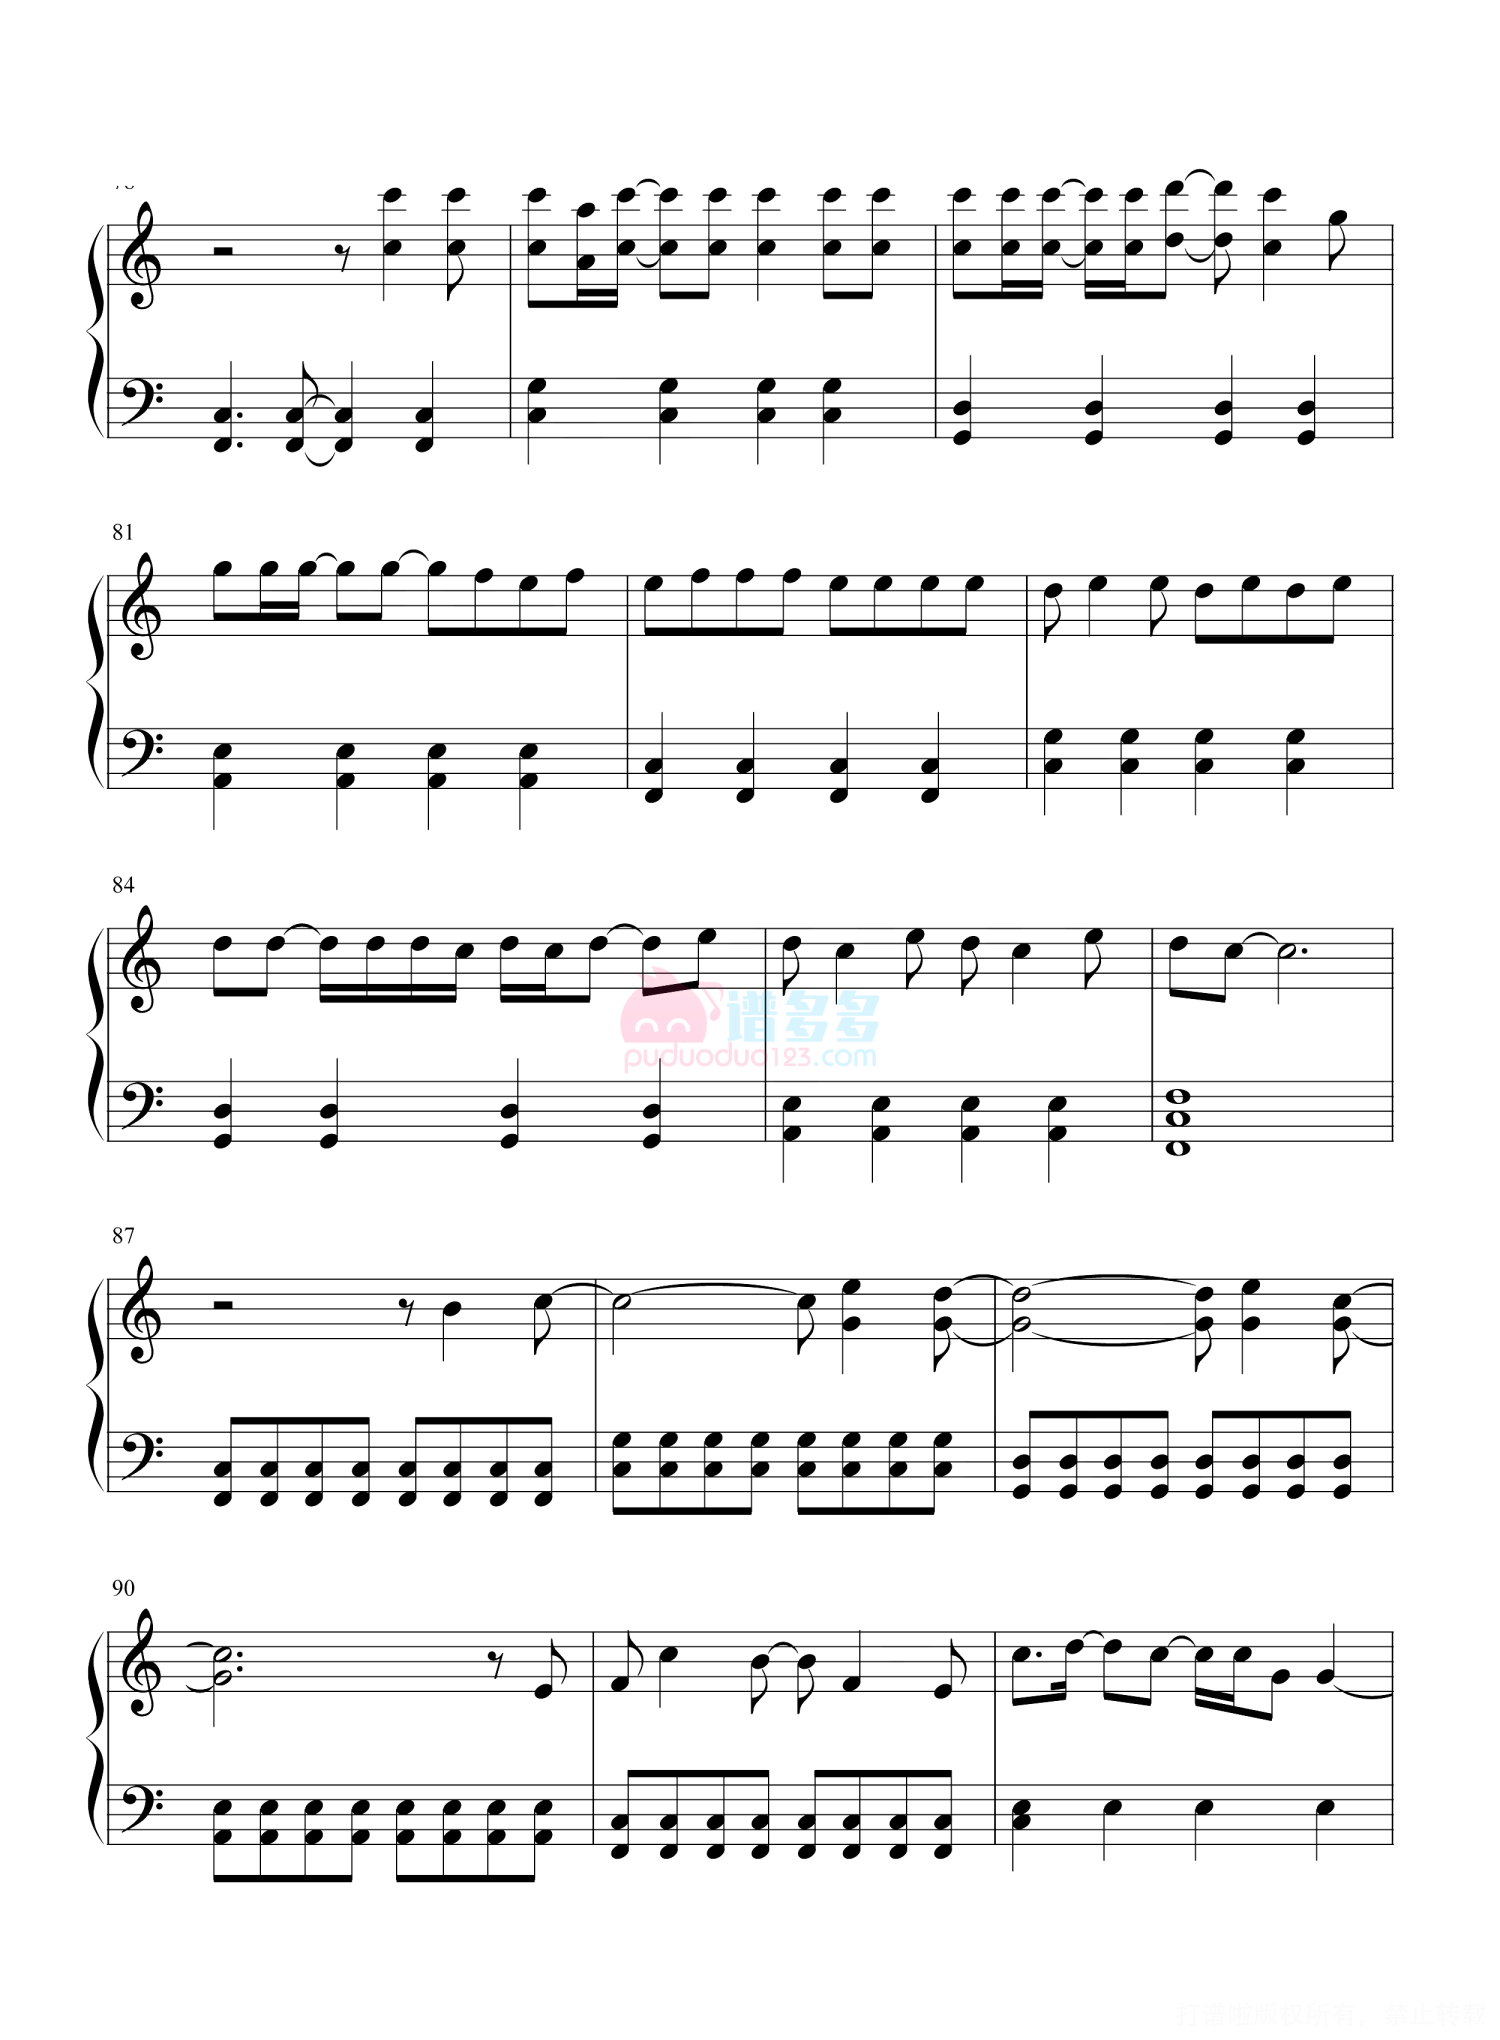 Taylor Swift-All Too Well Sheet Music pdf, - Free Score Download ★